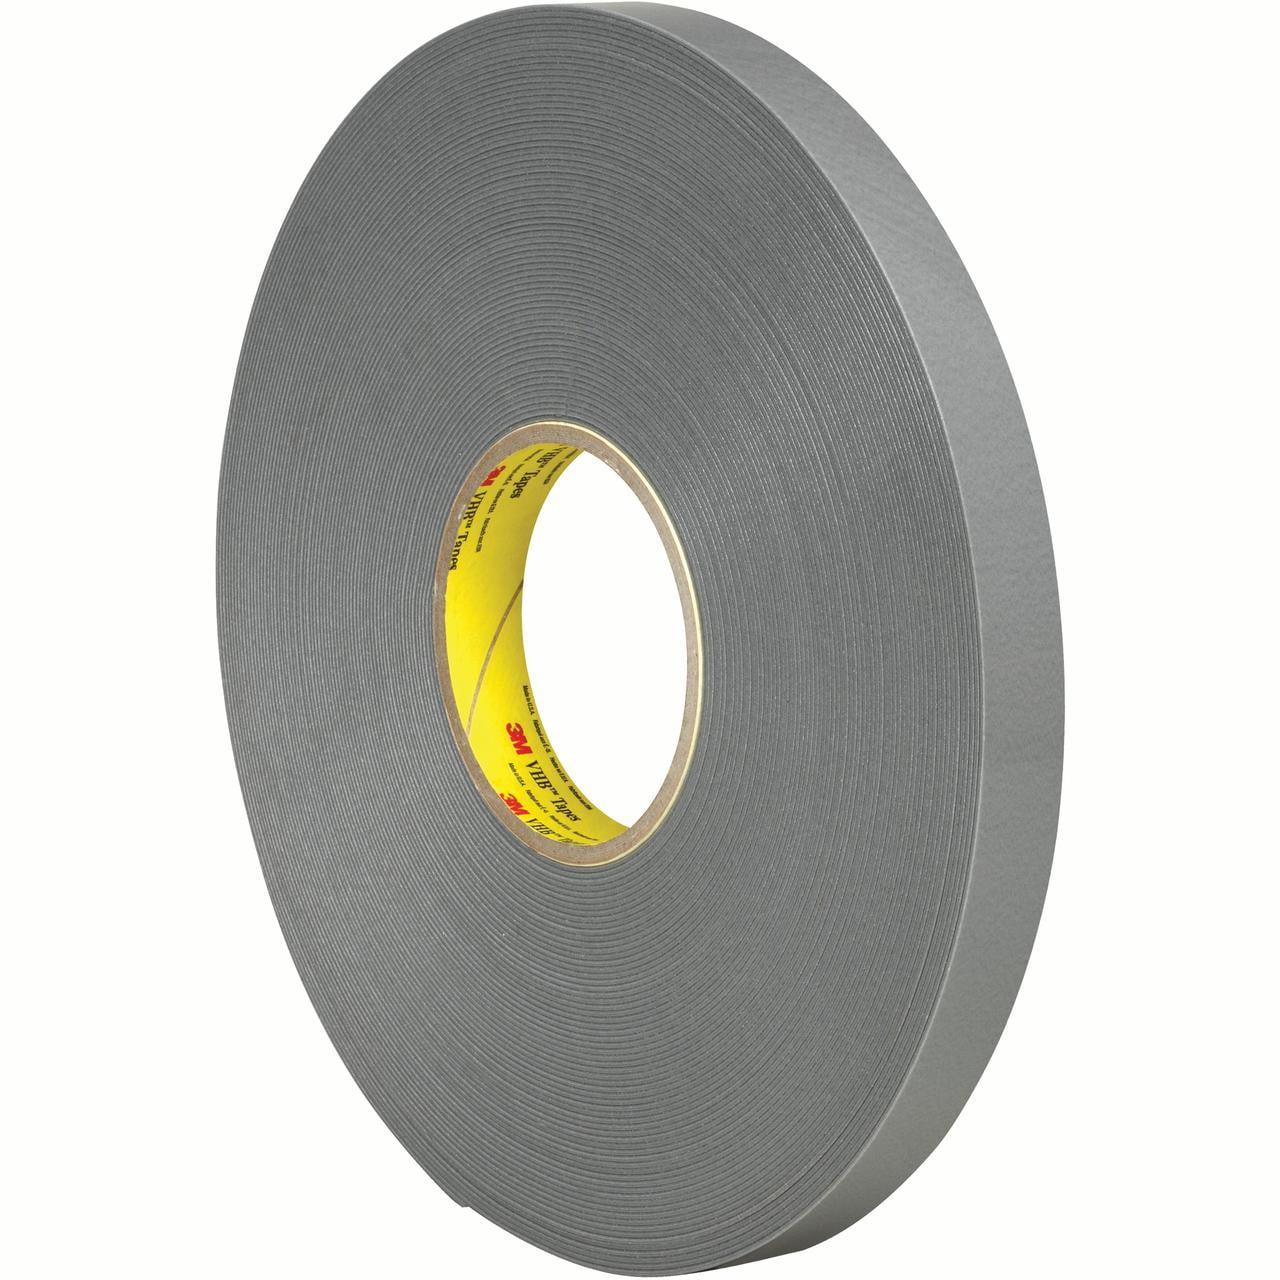 495734r 0.75 In. X 5 Yards Gray 3m 4957f Tape